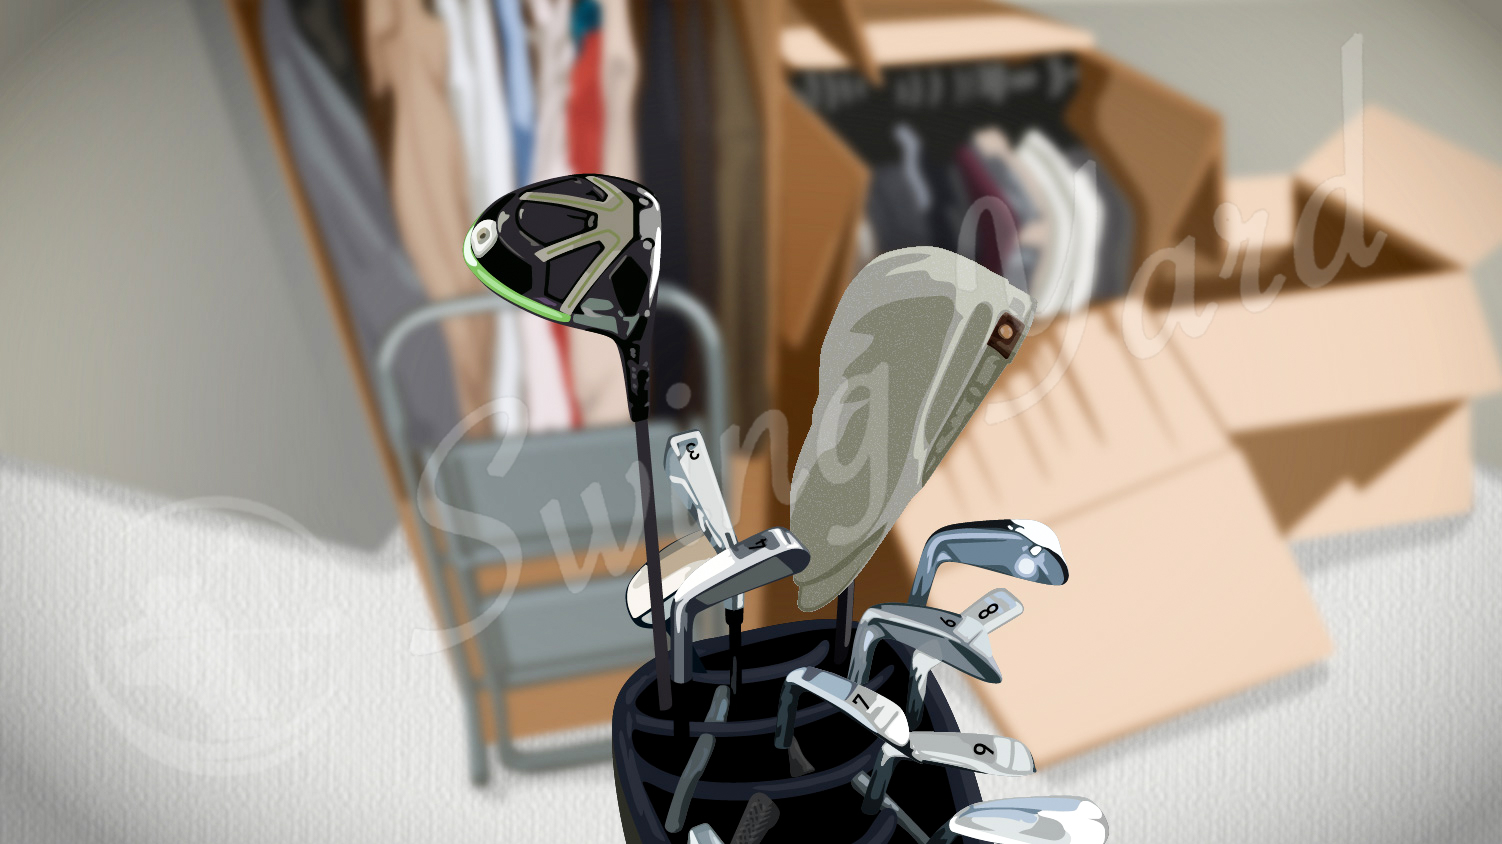 A golf bag fits conveniently in the closet